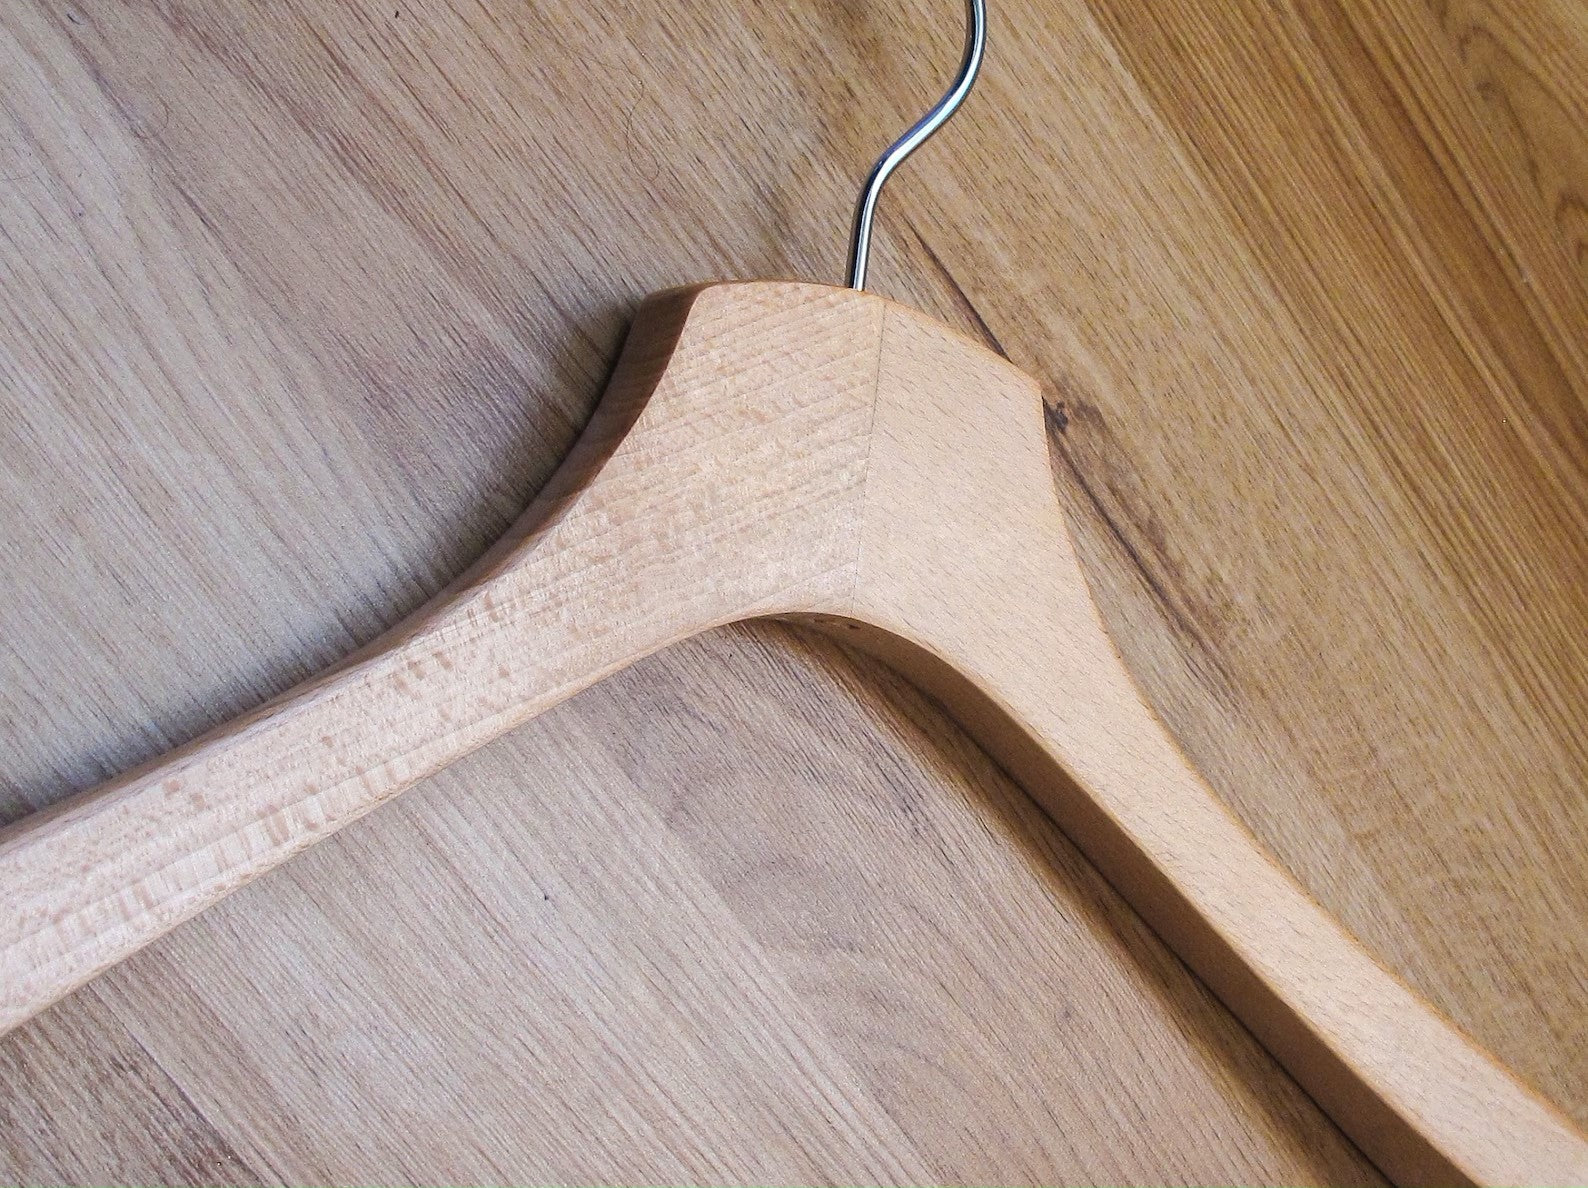 Natural Wooden Jacket Hangers with Pant Bar